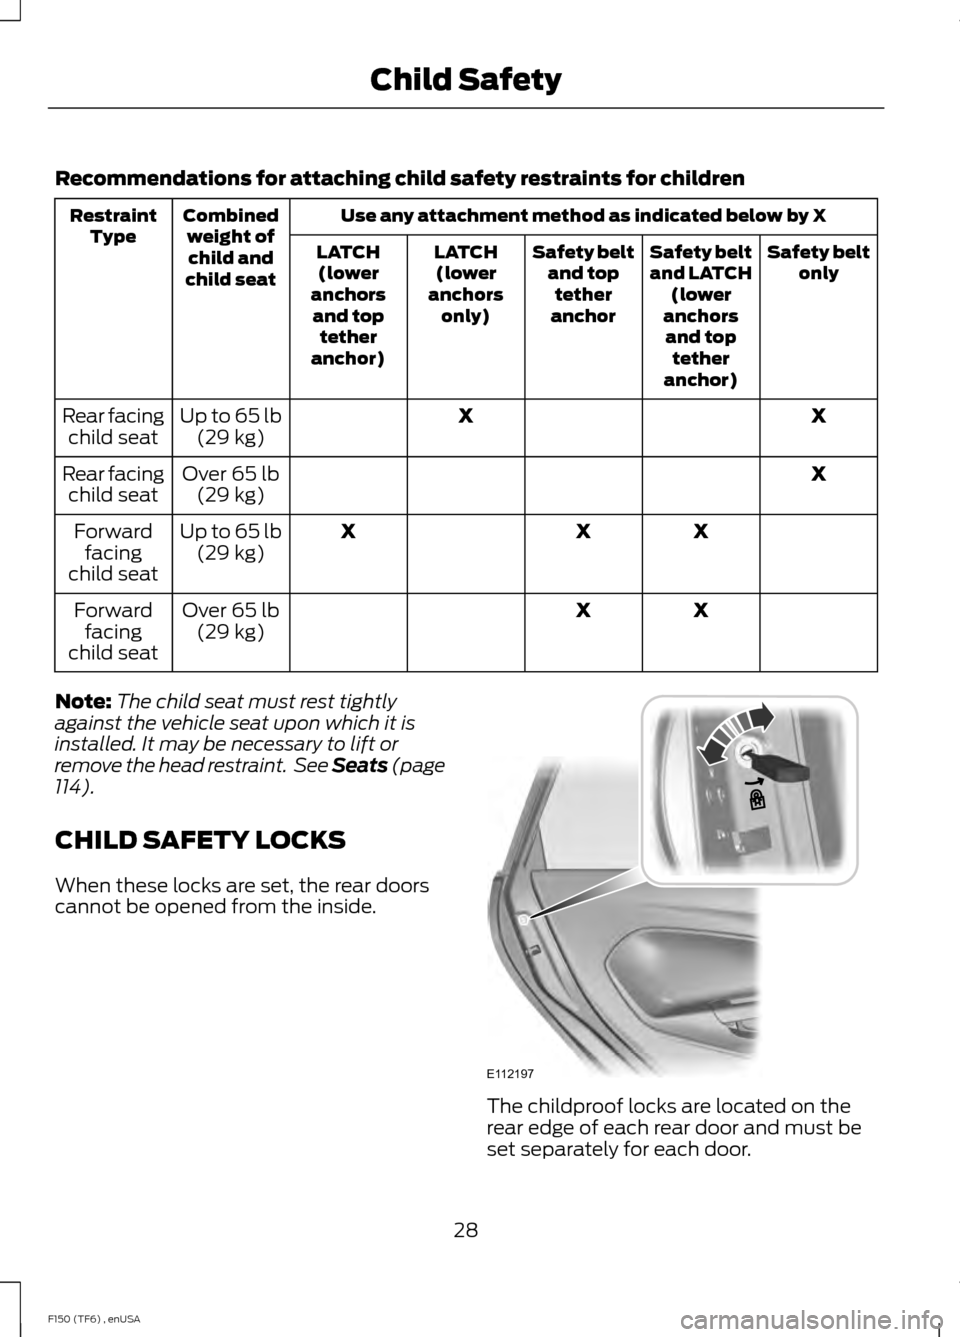 FORD F150 2014 12.G Owners Manual Recommendations for attaching child safety restraints for children
Use any attachment method as indicated below by X
Combined
weight ofchild and
child seat
Restraint
Type Safety belt
only
Safety belt
